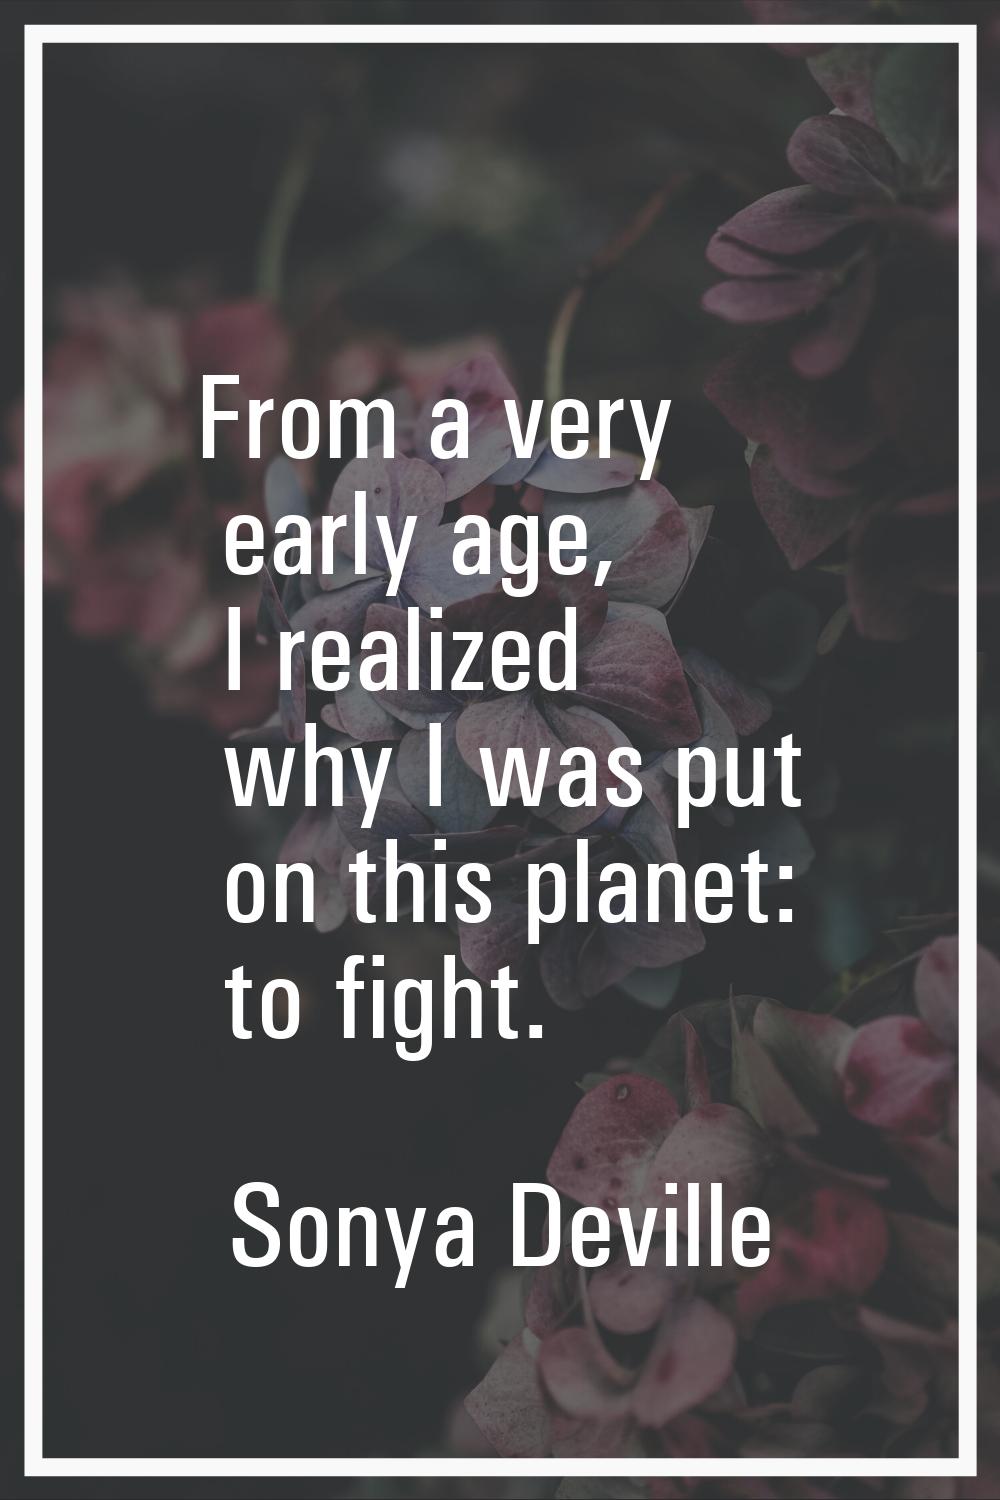 From a very early age, I realized why I was put on this planet: to fight.